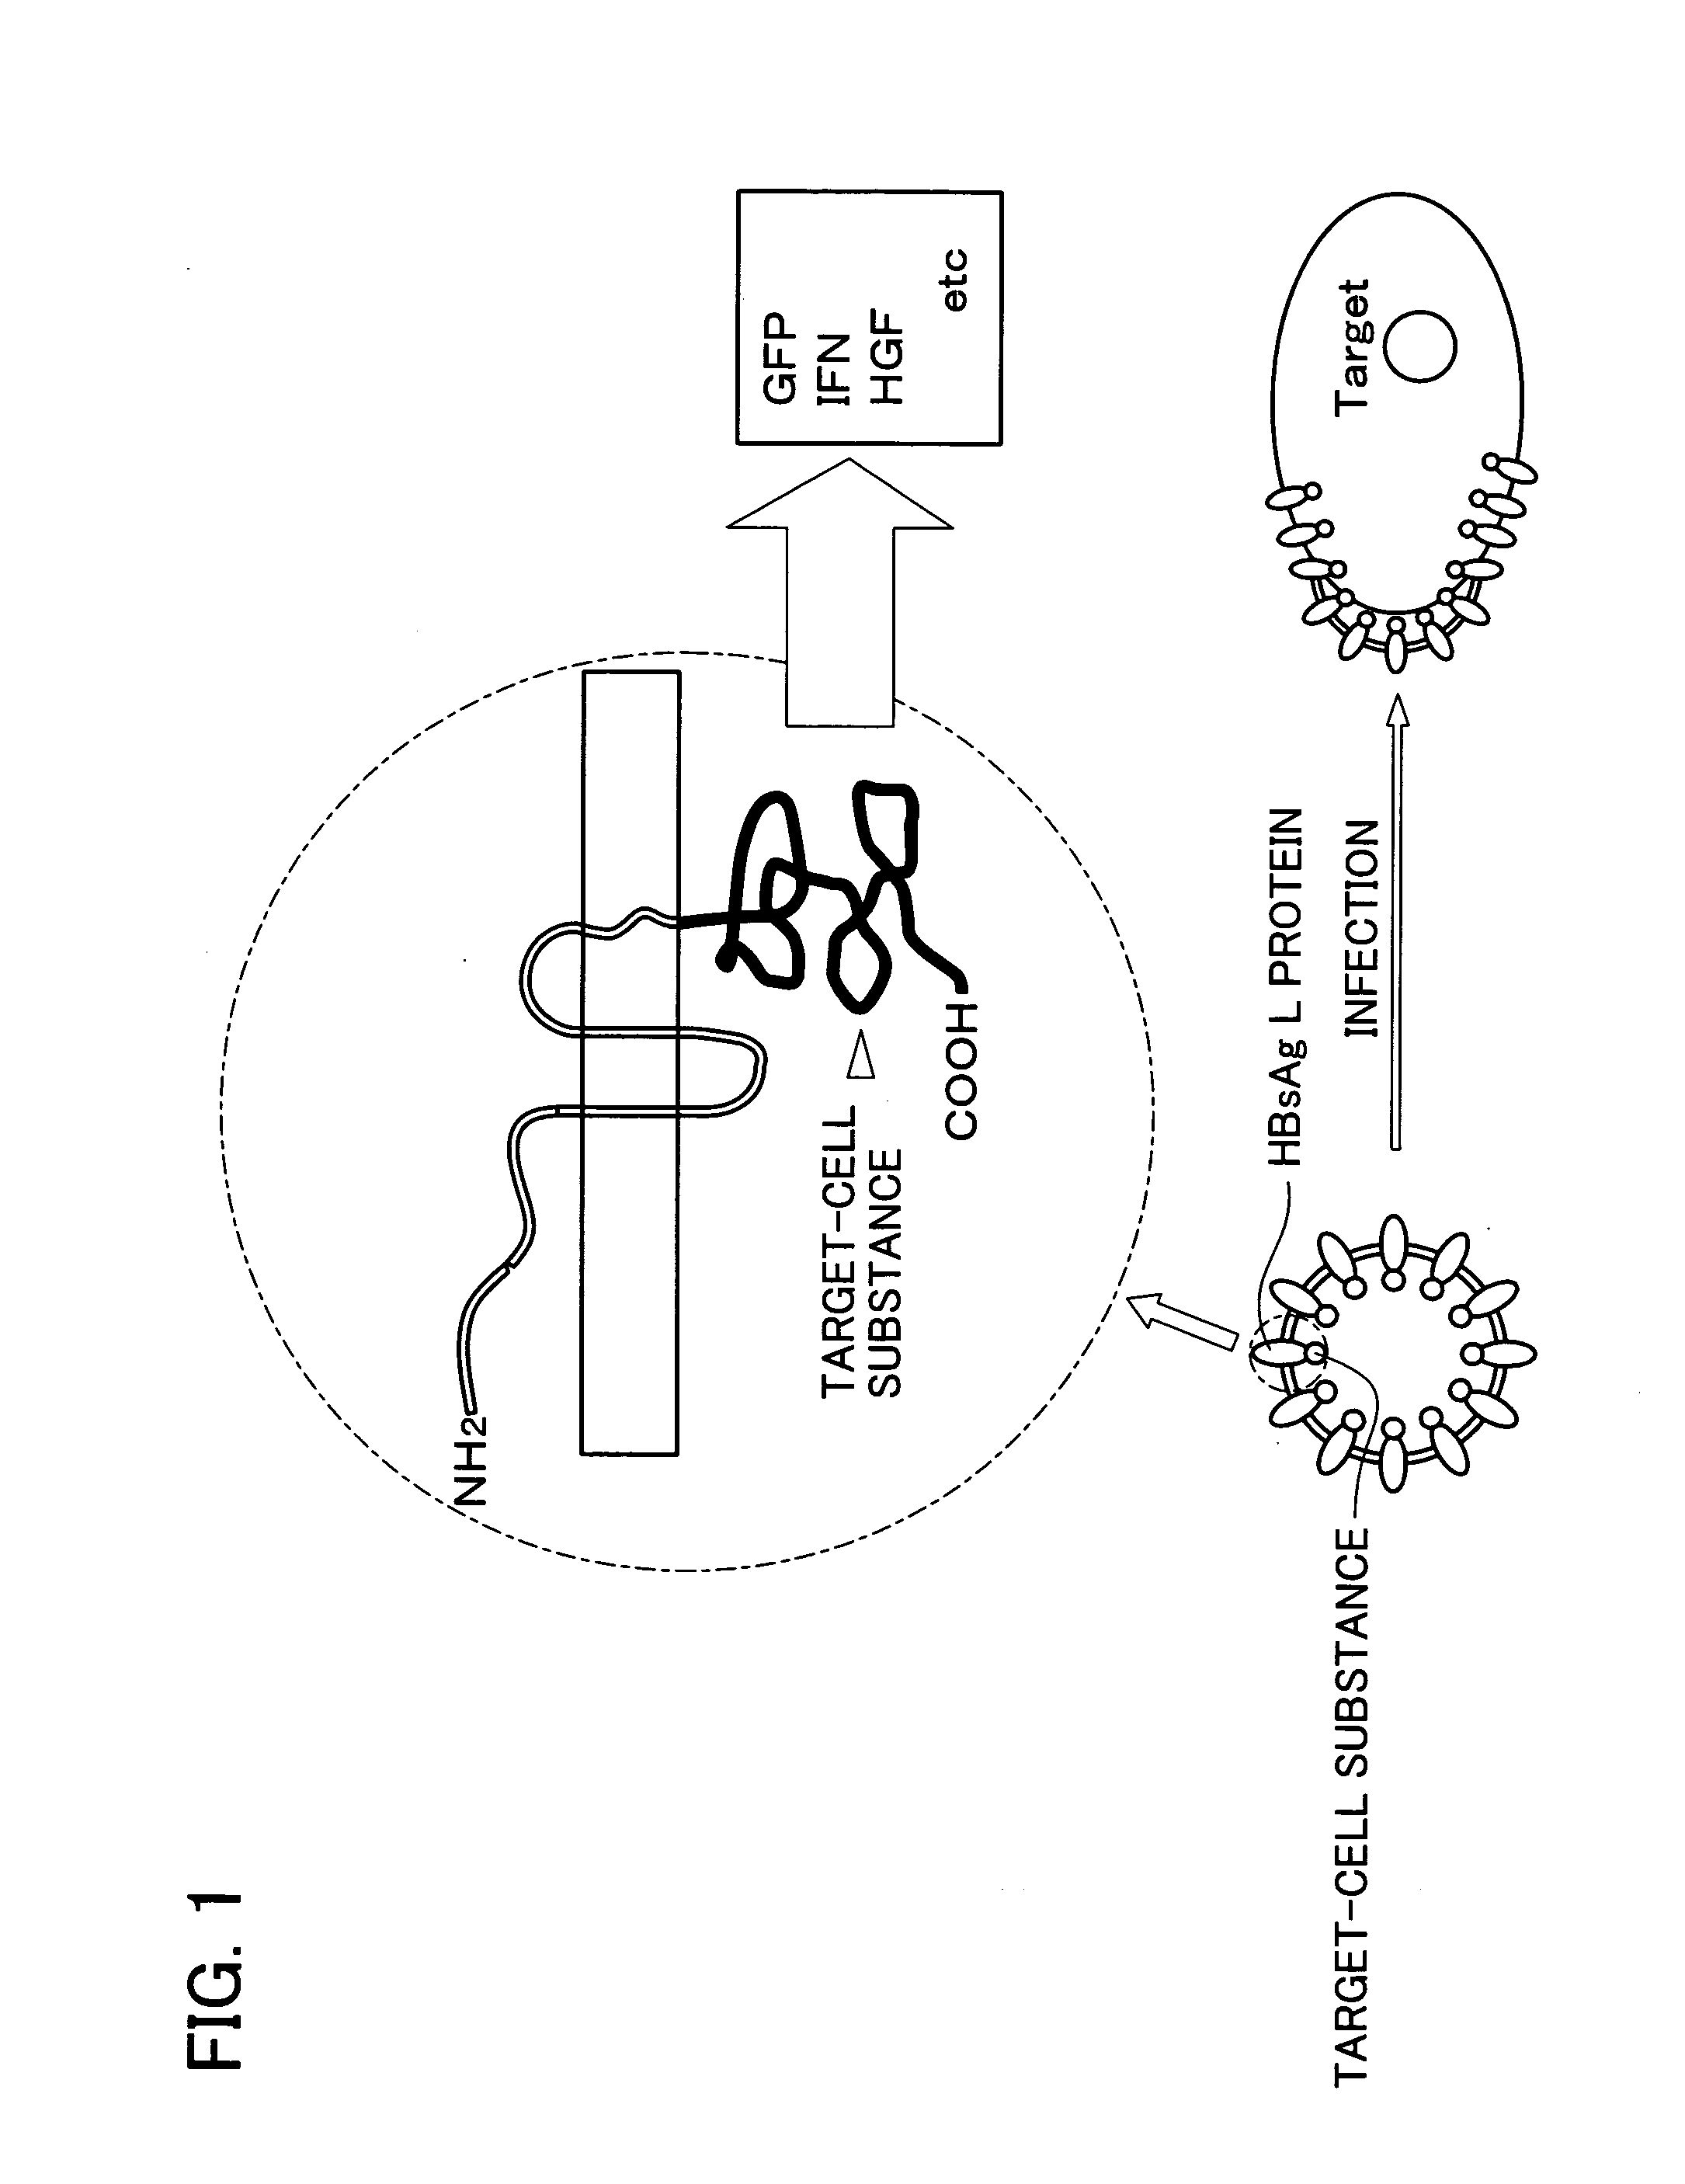 Drugs comprising protein forming hollow nanoparticles and therapeutic substance to be transferred into cells fused therewith